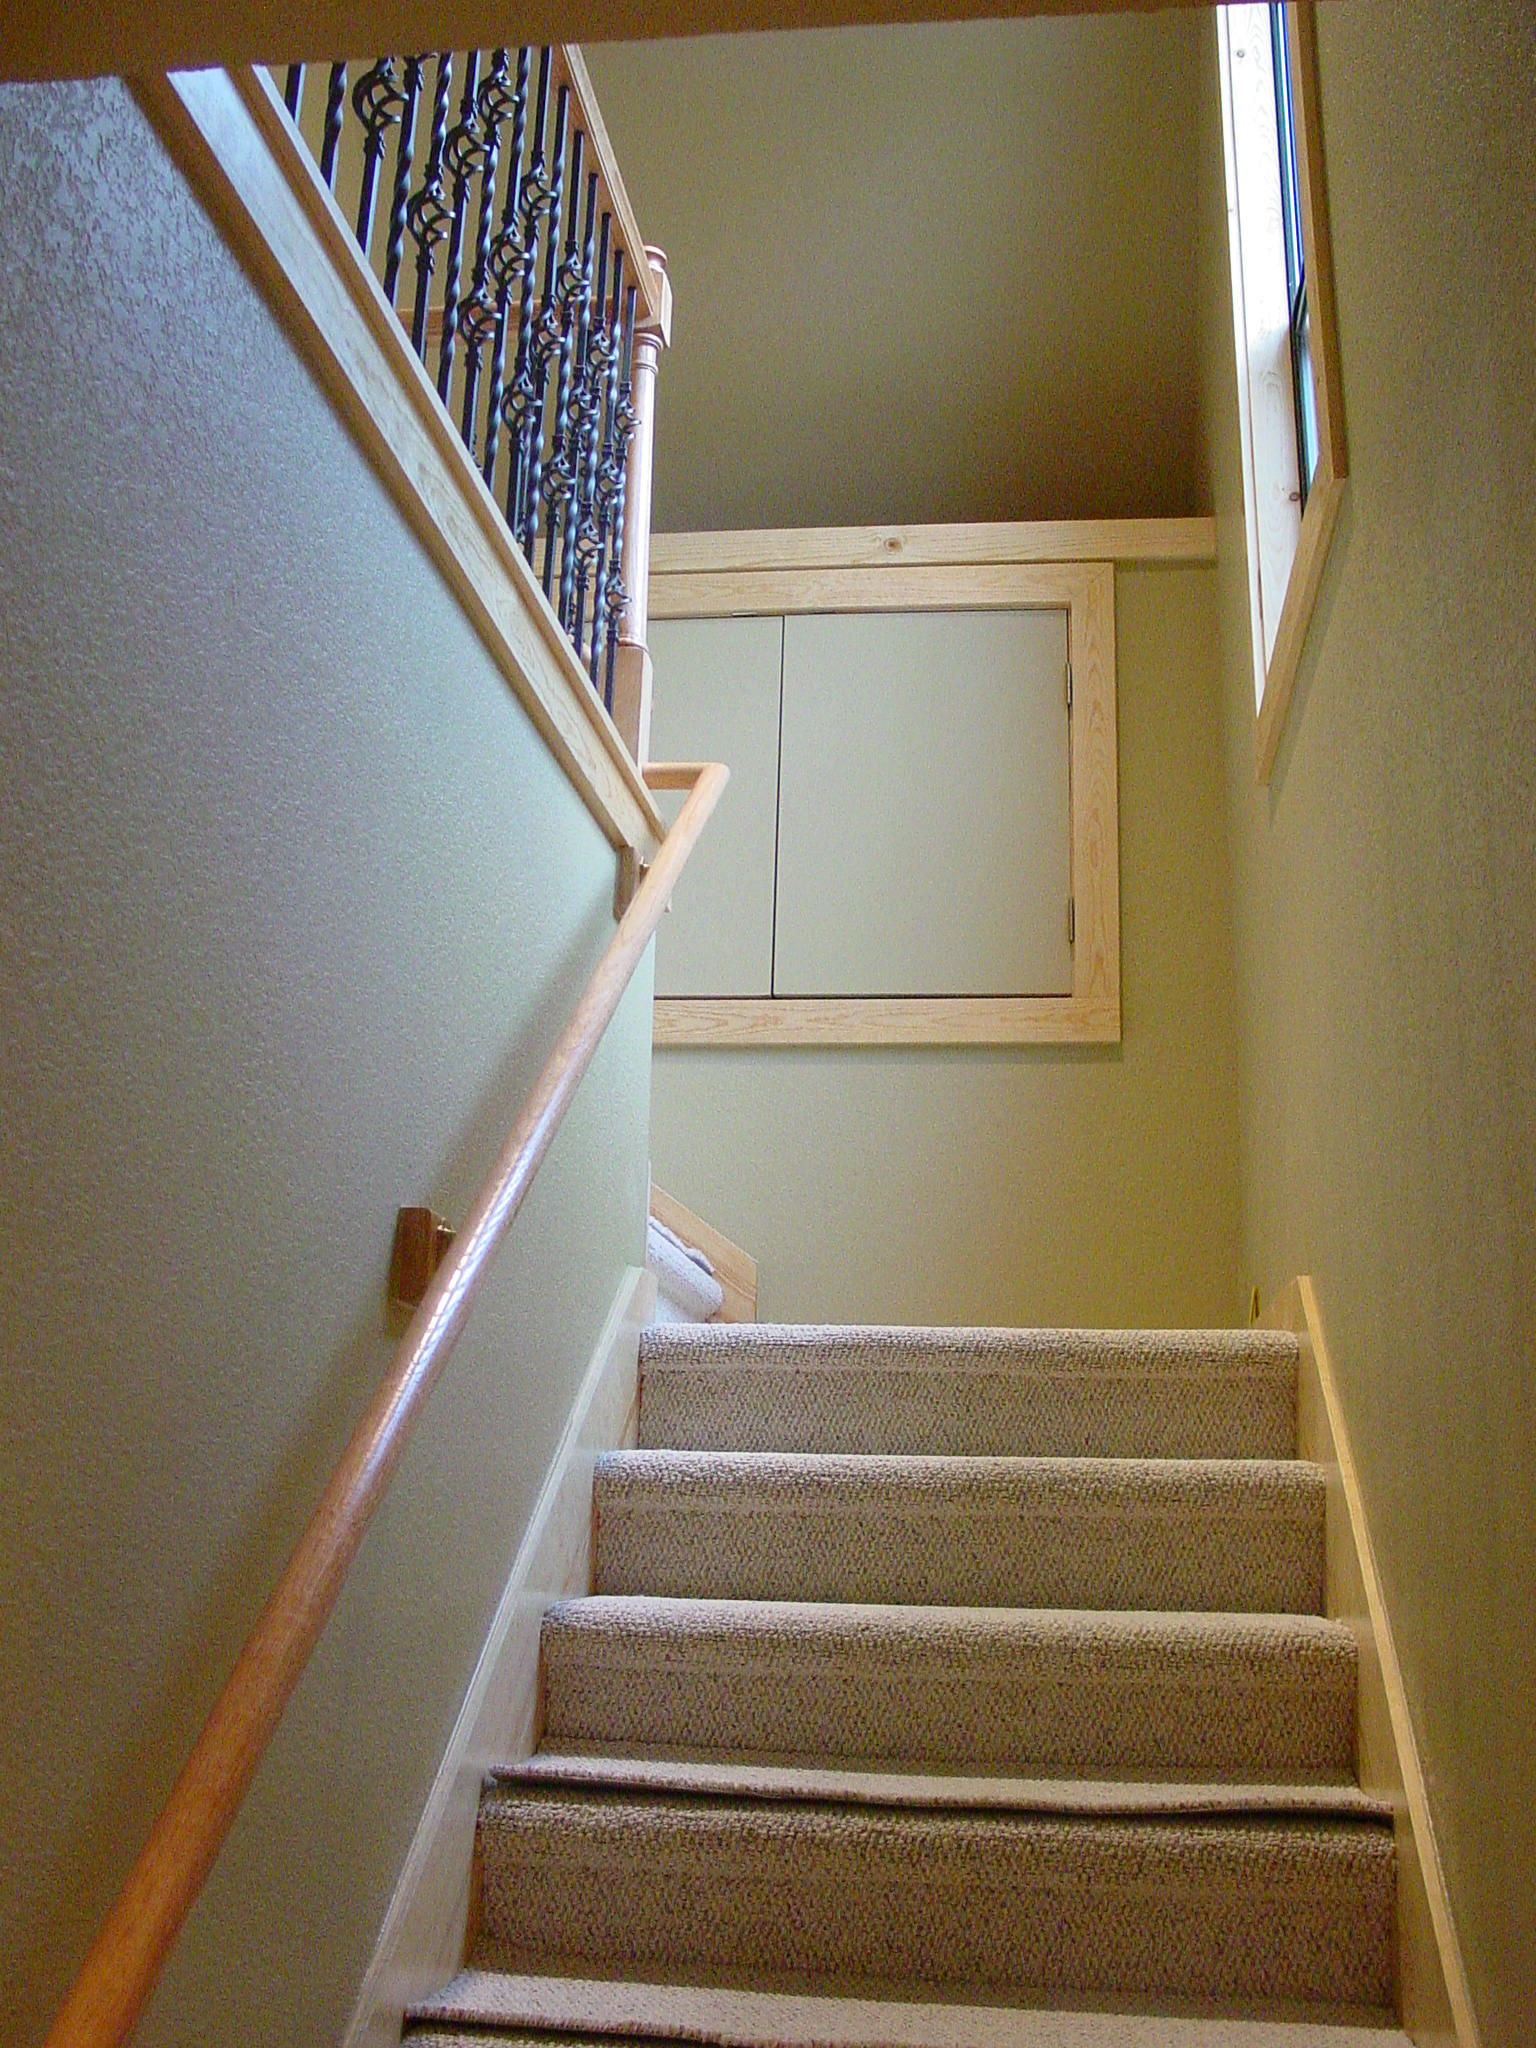 4802 WB - Interior, Complete,stairs.jpg